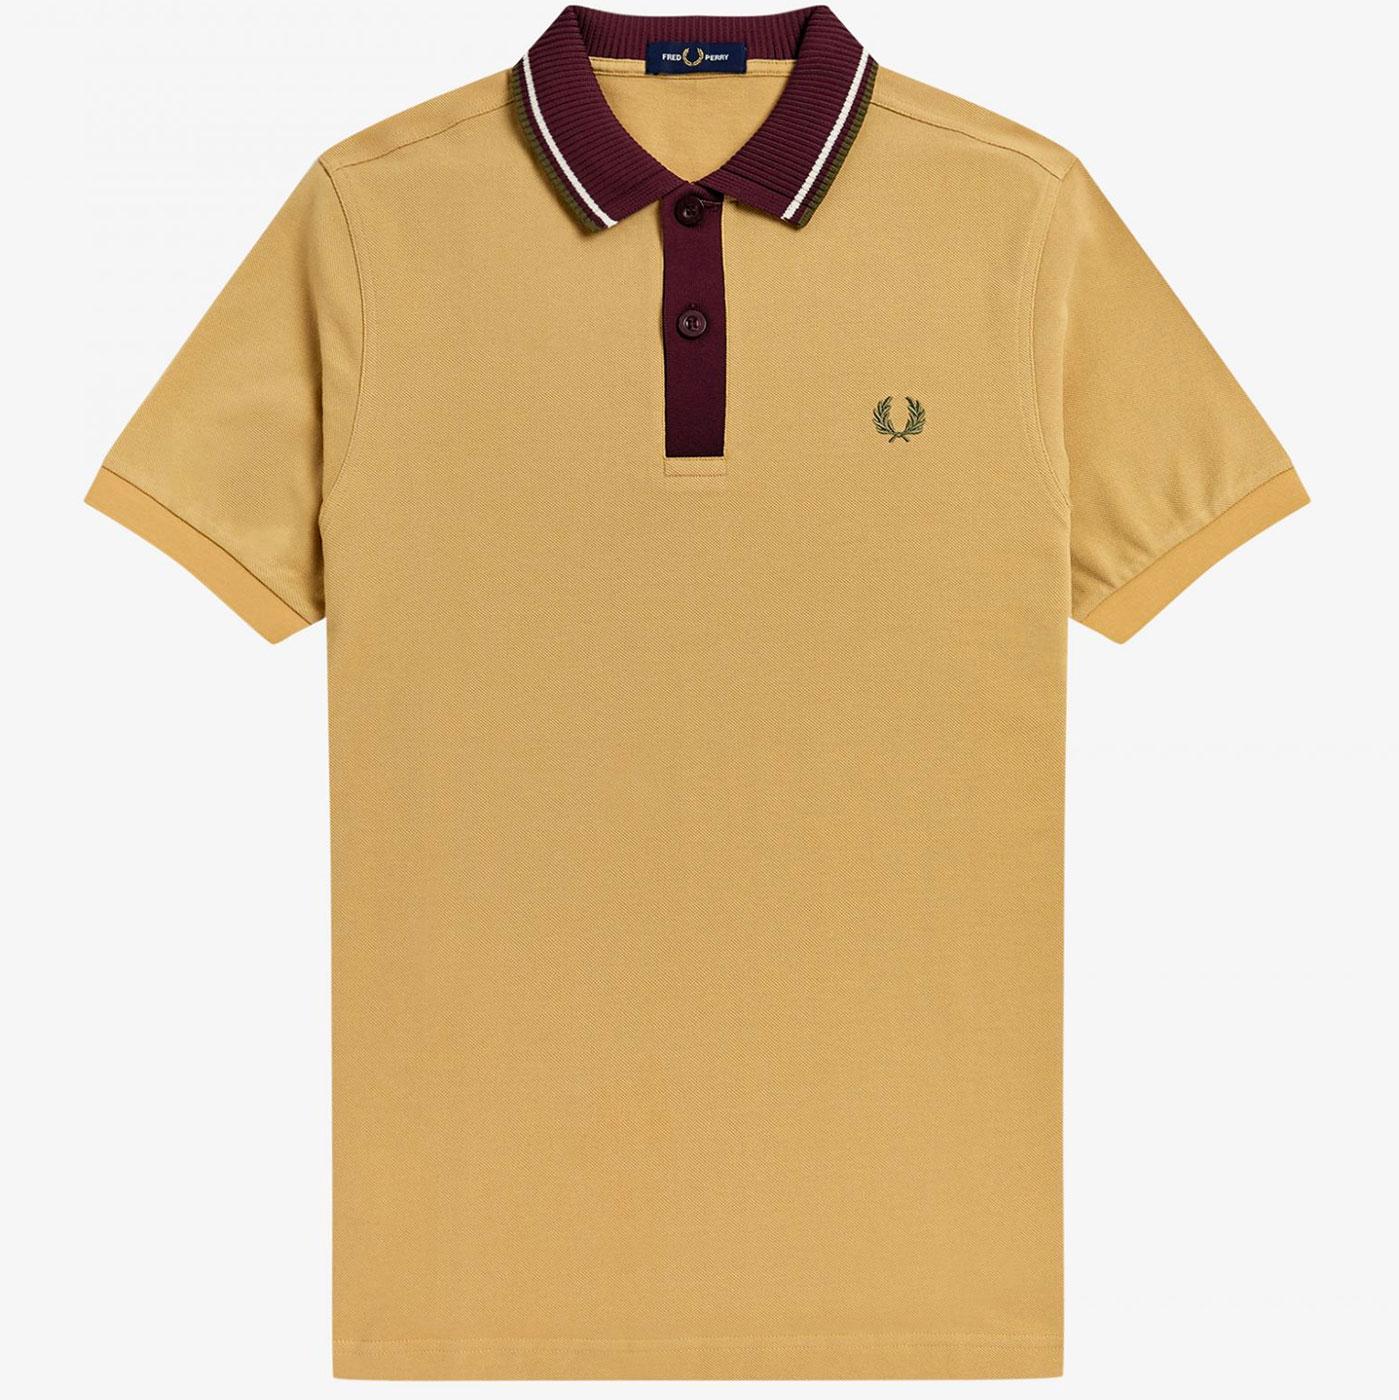 FRED PERRY Retro Mod Knitted Collar Pique Polo Shirt Desert